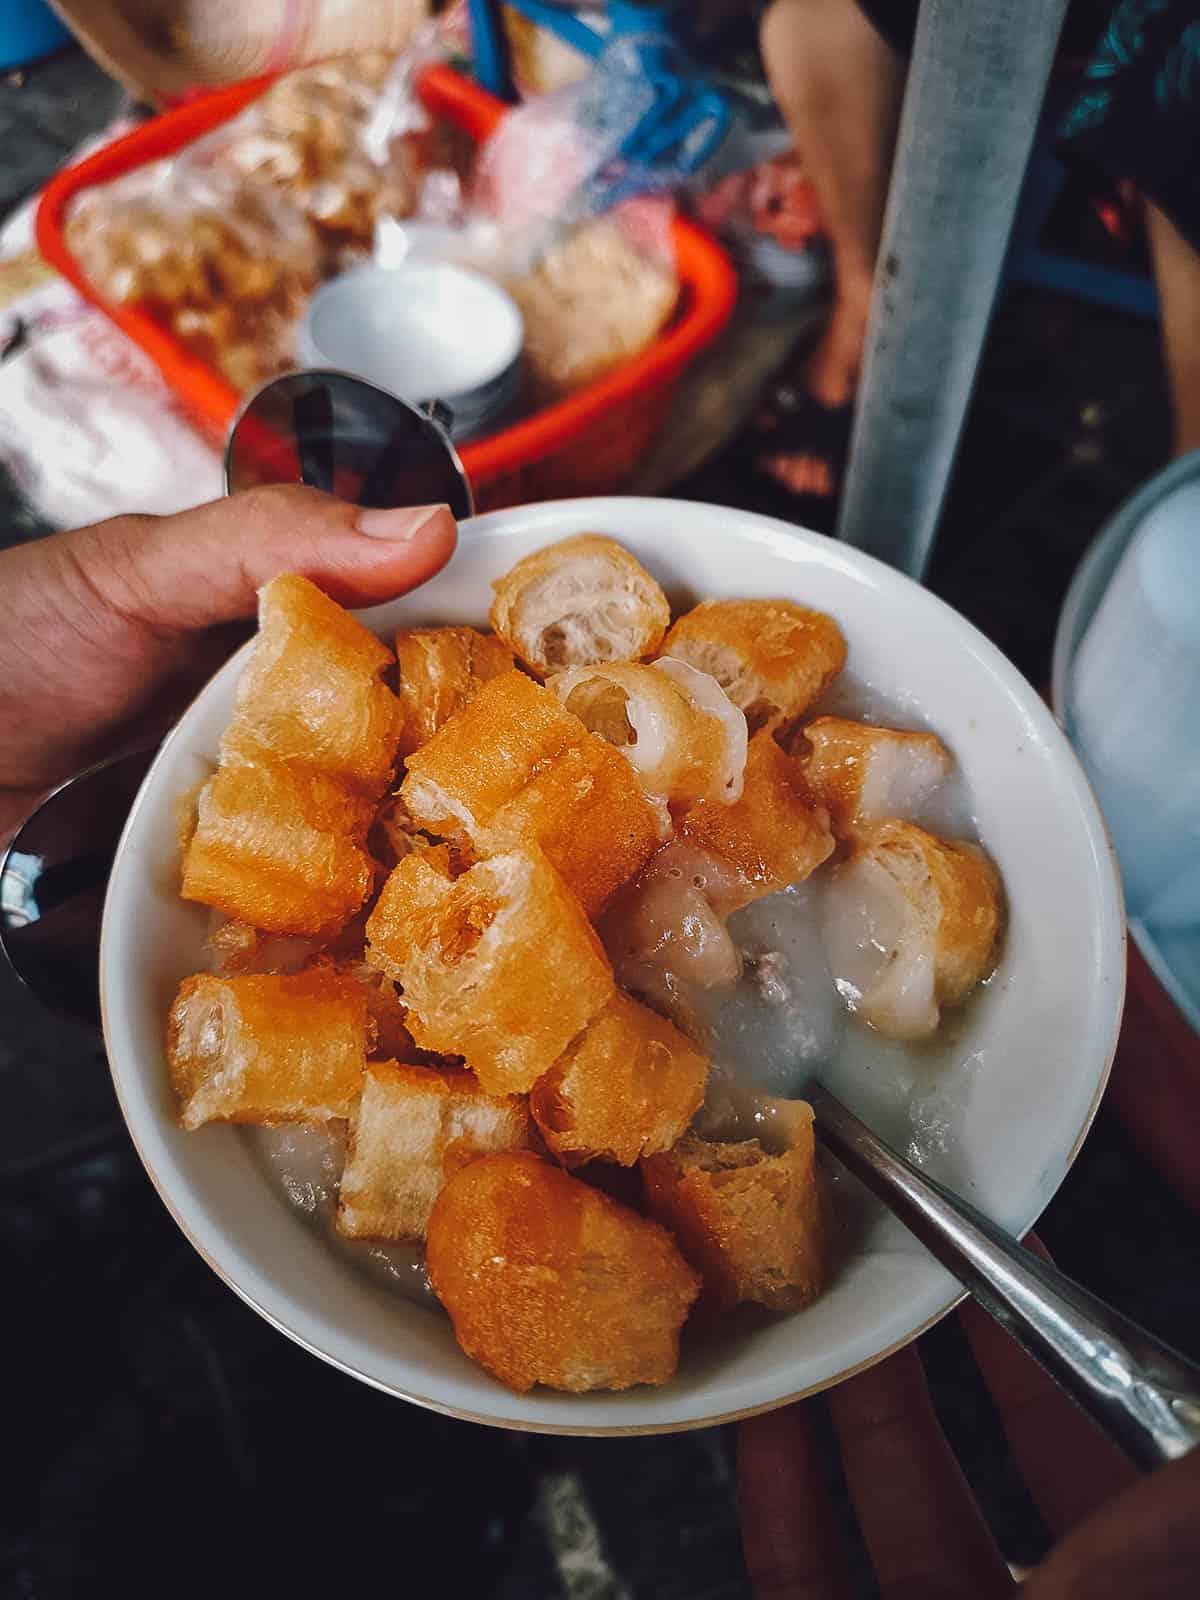 Chao Ga with crullers in Hanoi, a tasty Vietnamese chicken congee or porridge